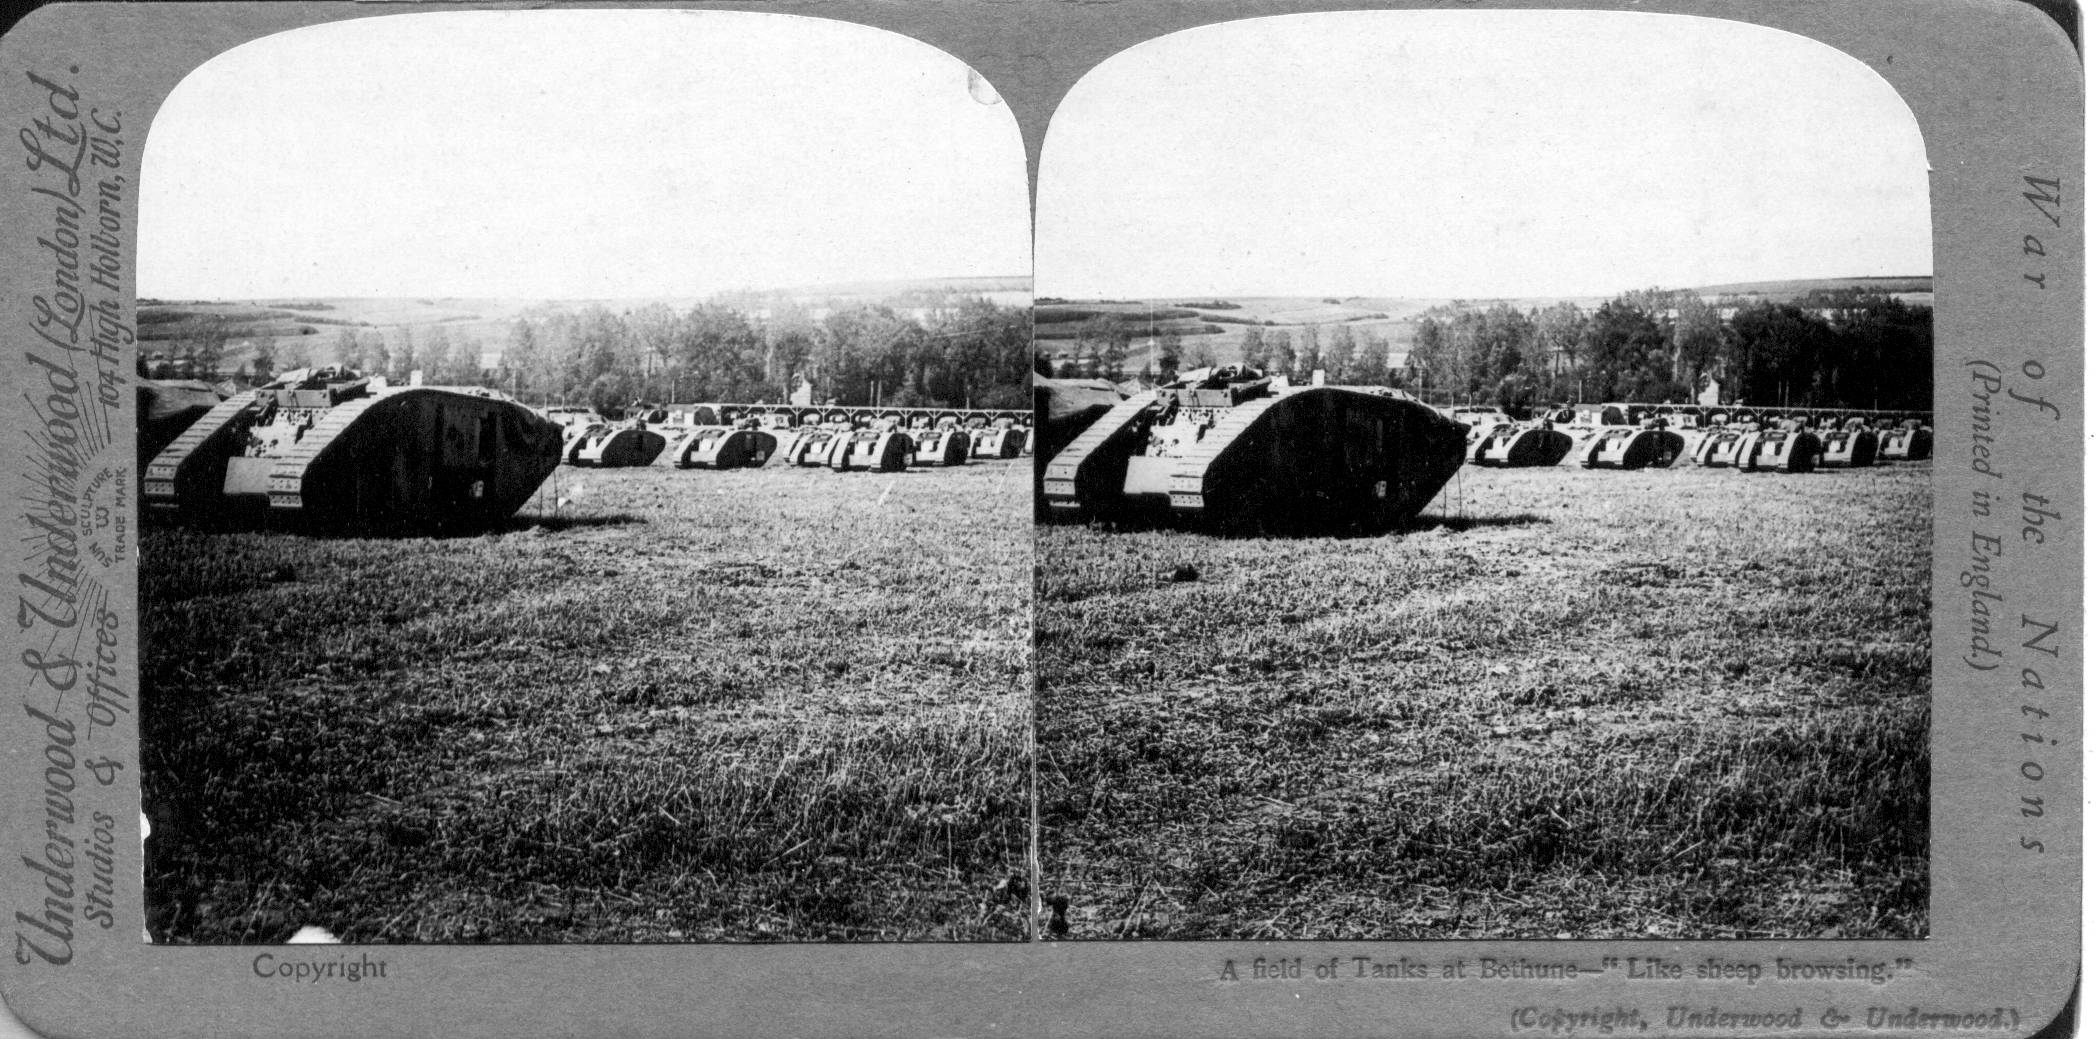 A field of Tanks at Bethune--"Like sheep browsing"